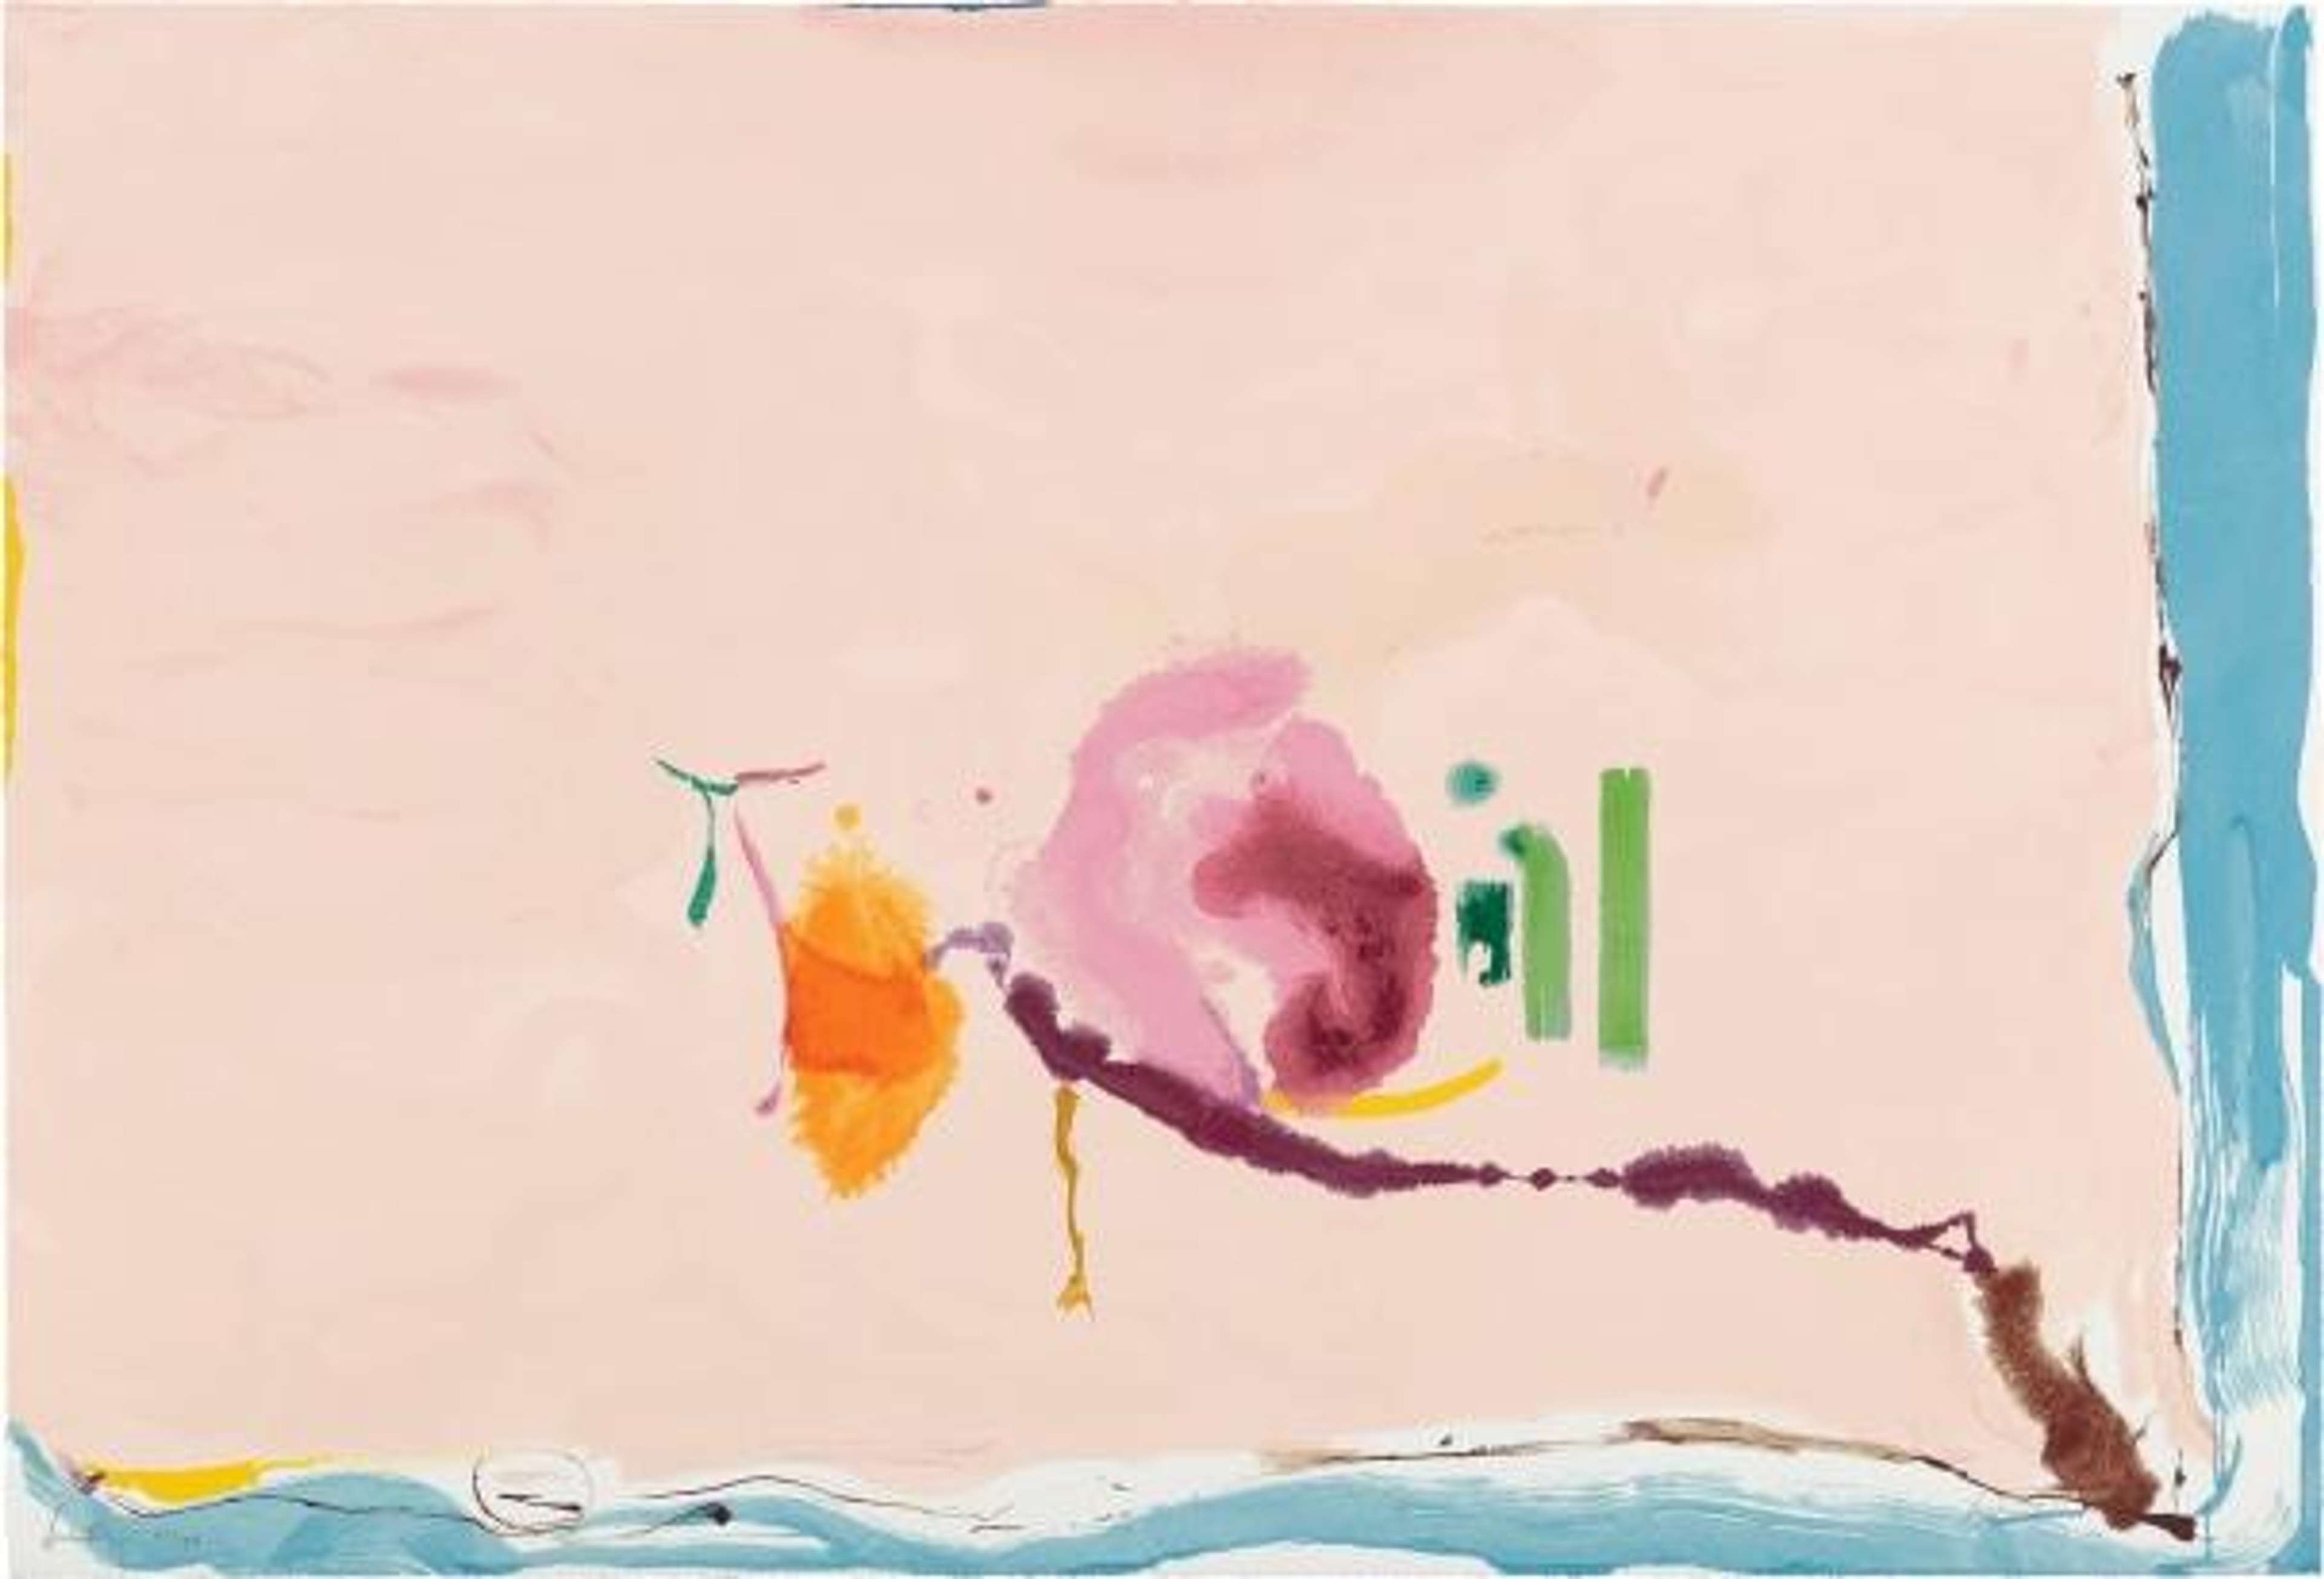 Helen Frankenthaler’s Flirt. An abstract expressionist screenprint of a landscape of a pink background with blue, red, and orange accents. 